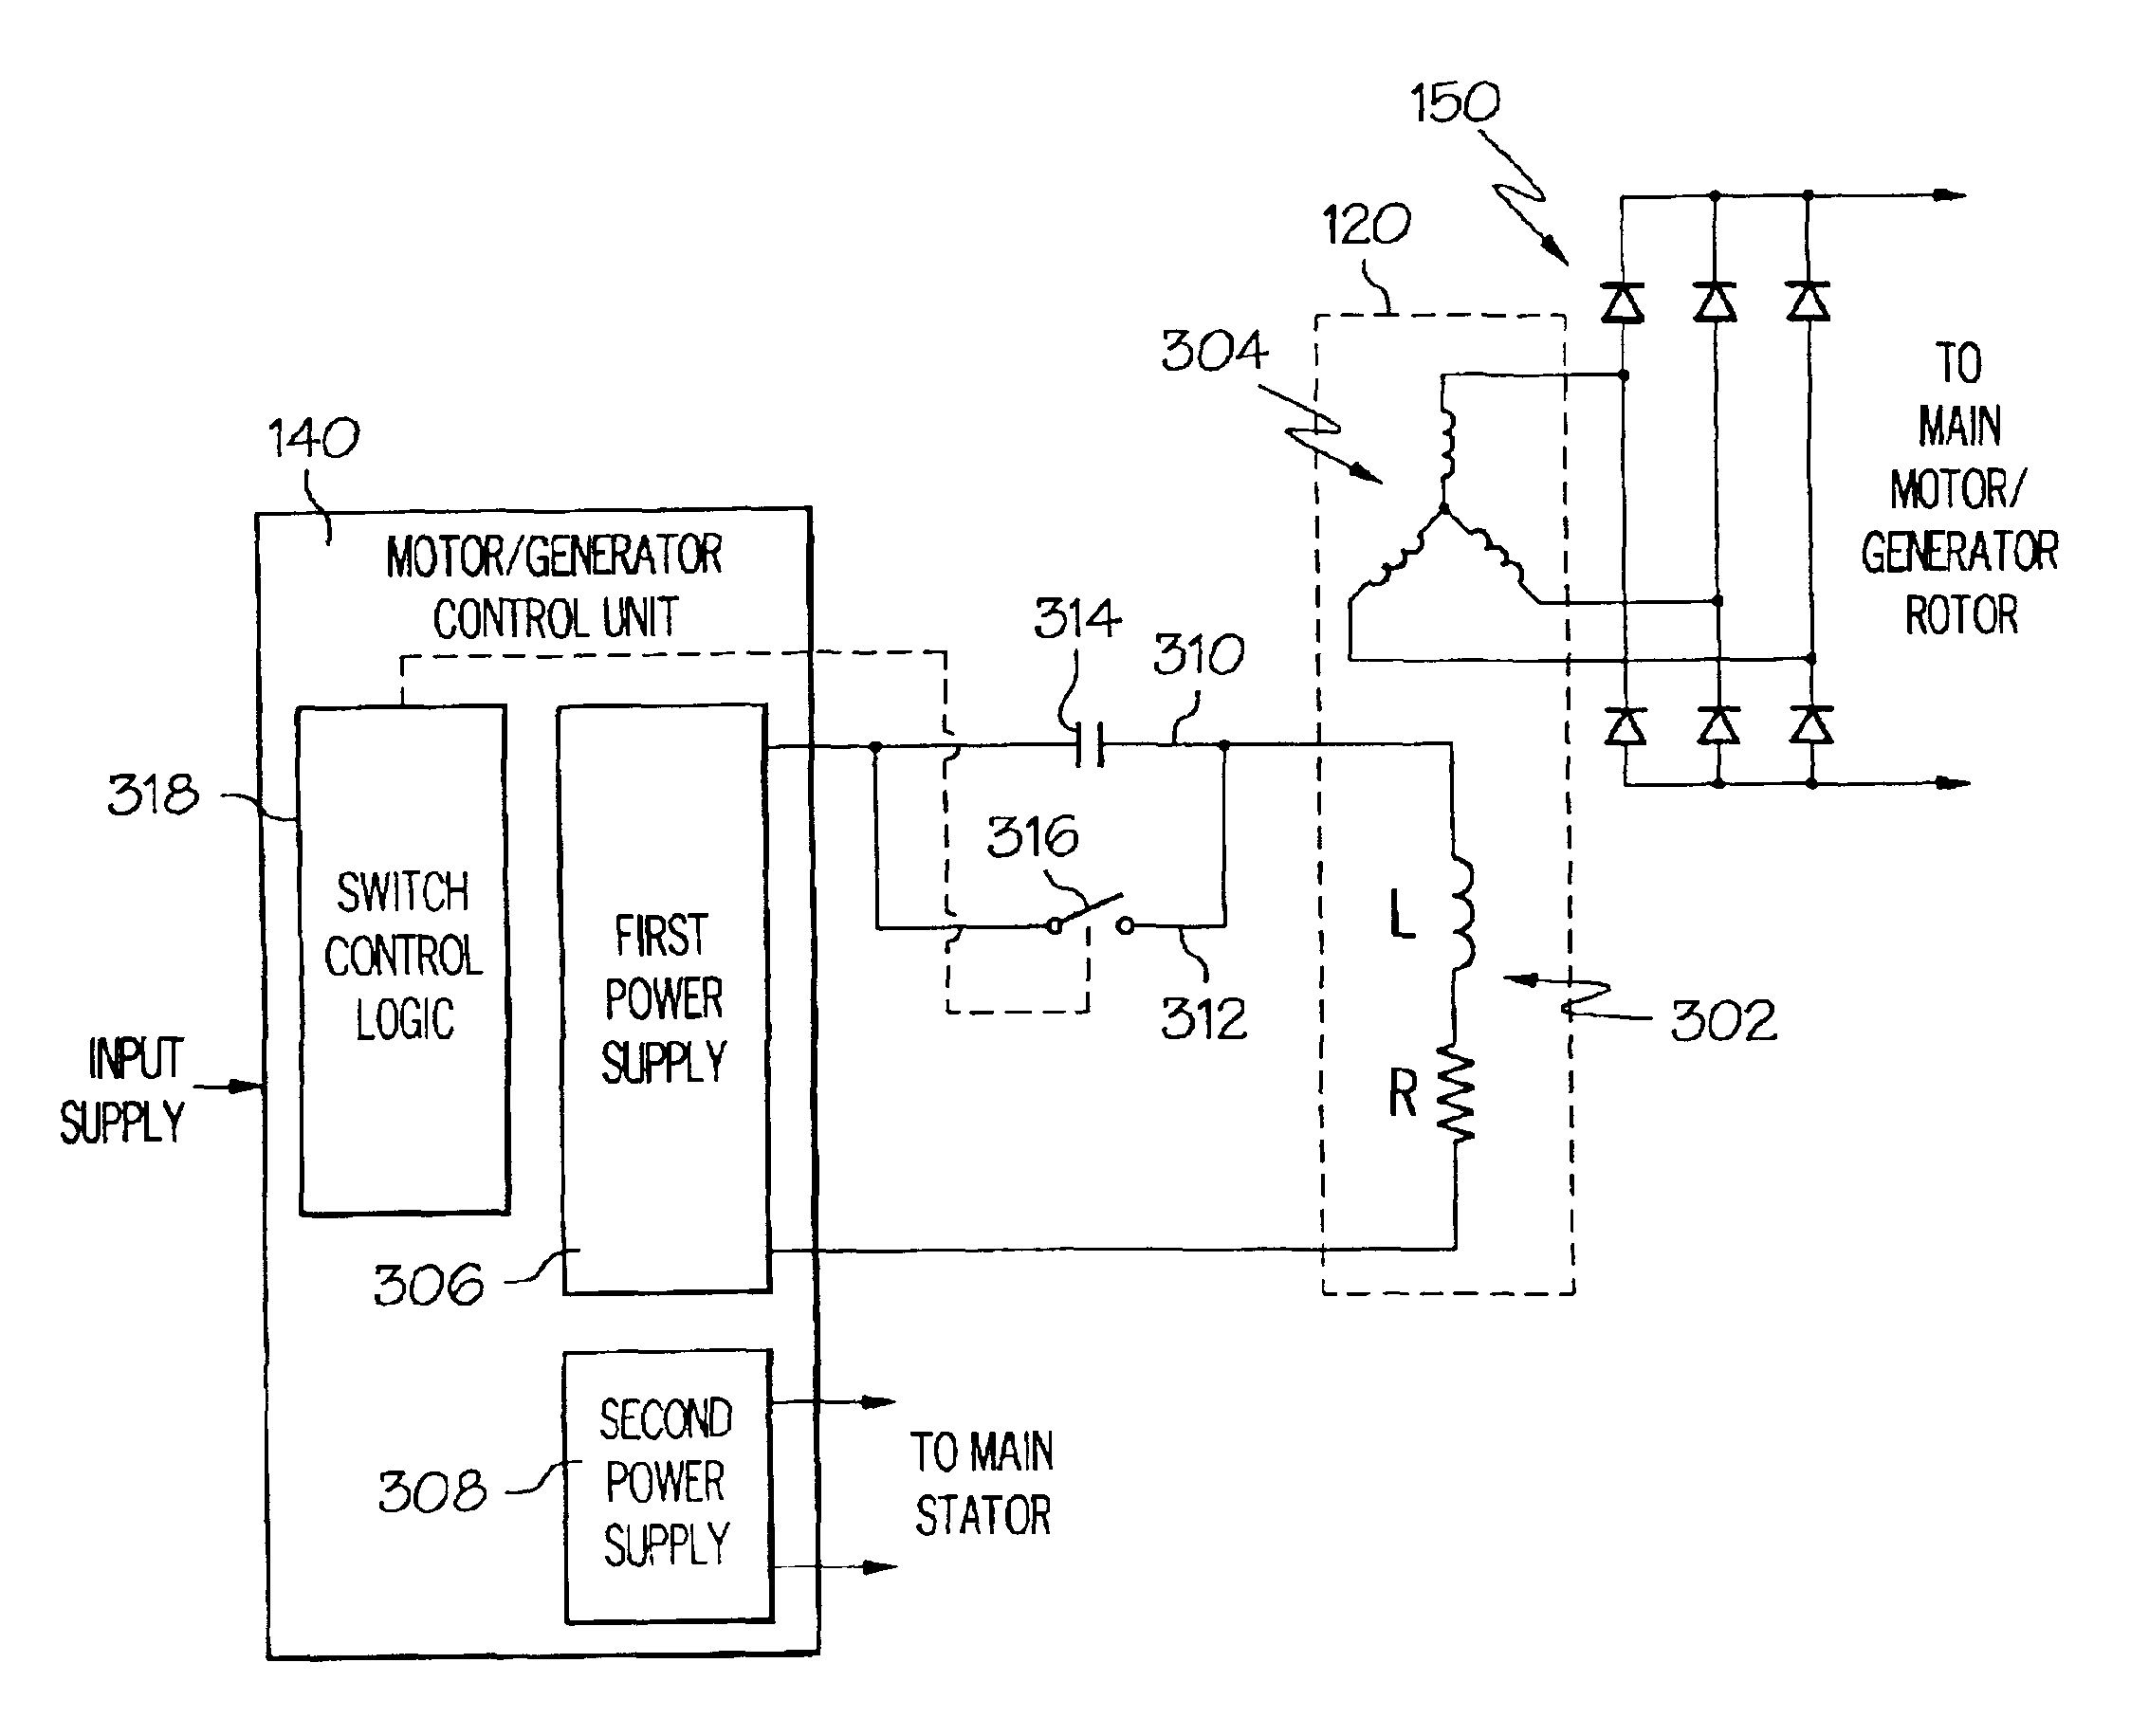 Gas turbine engine starter-generator exciter starting system and method including a capacitance circuit element